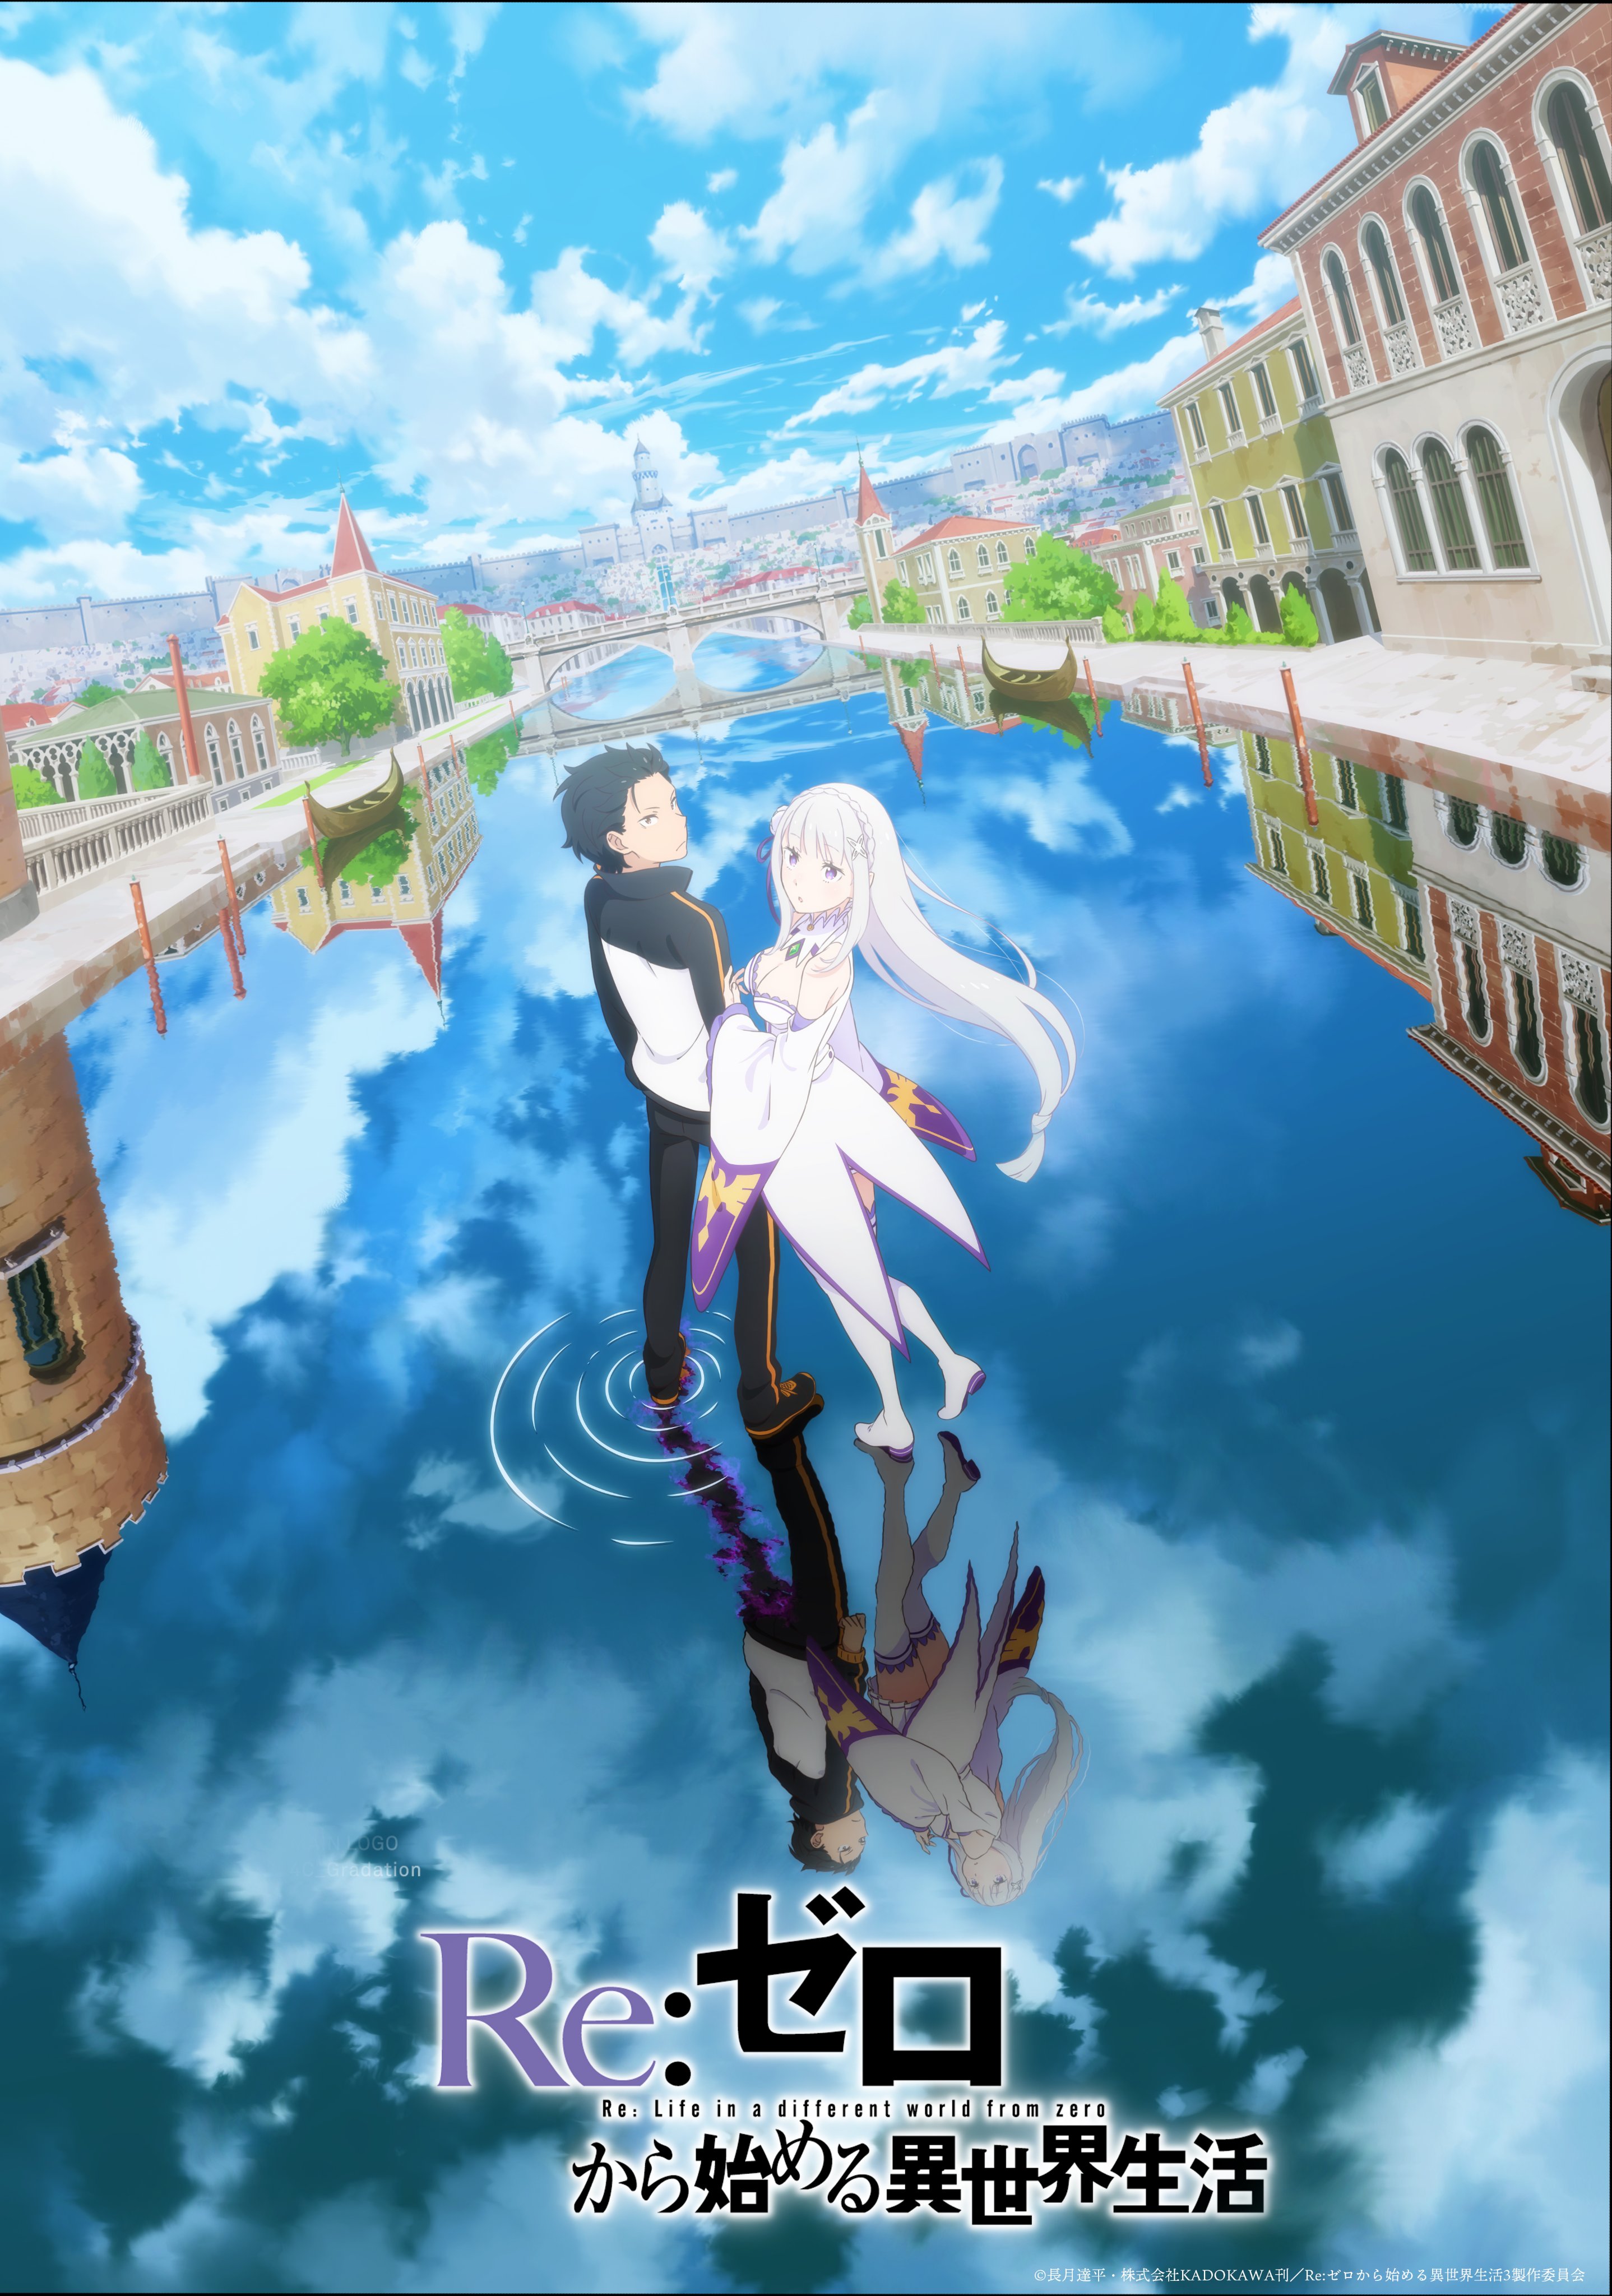 Re:ZERO -Starting Life in Another World- Season 3 teaser visual